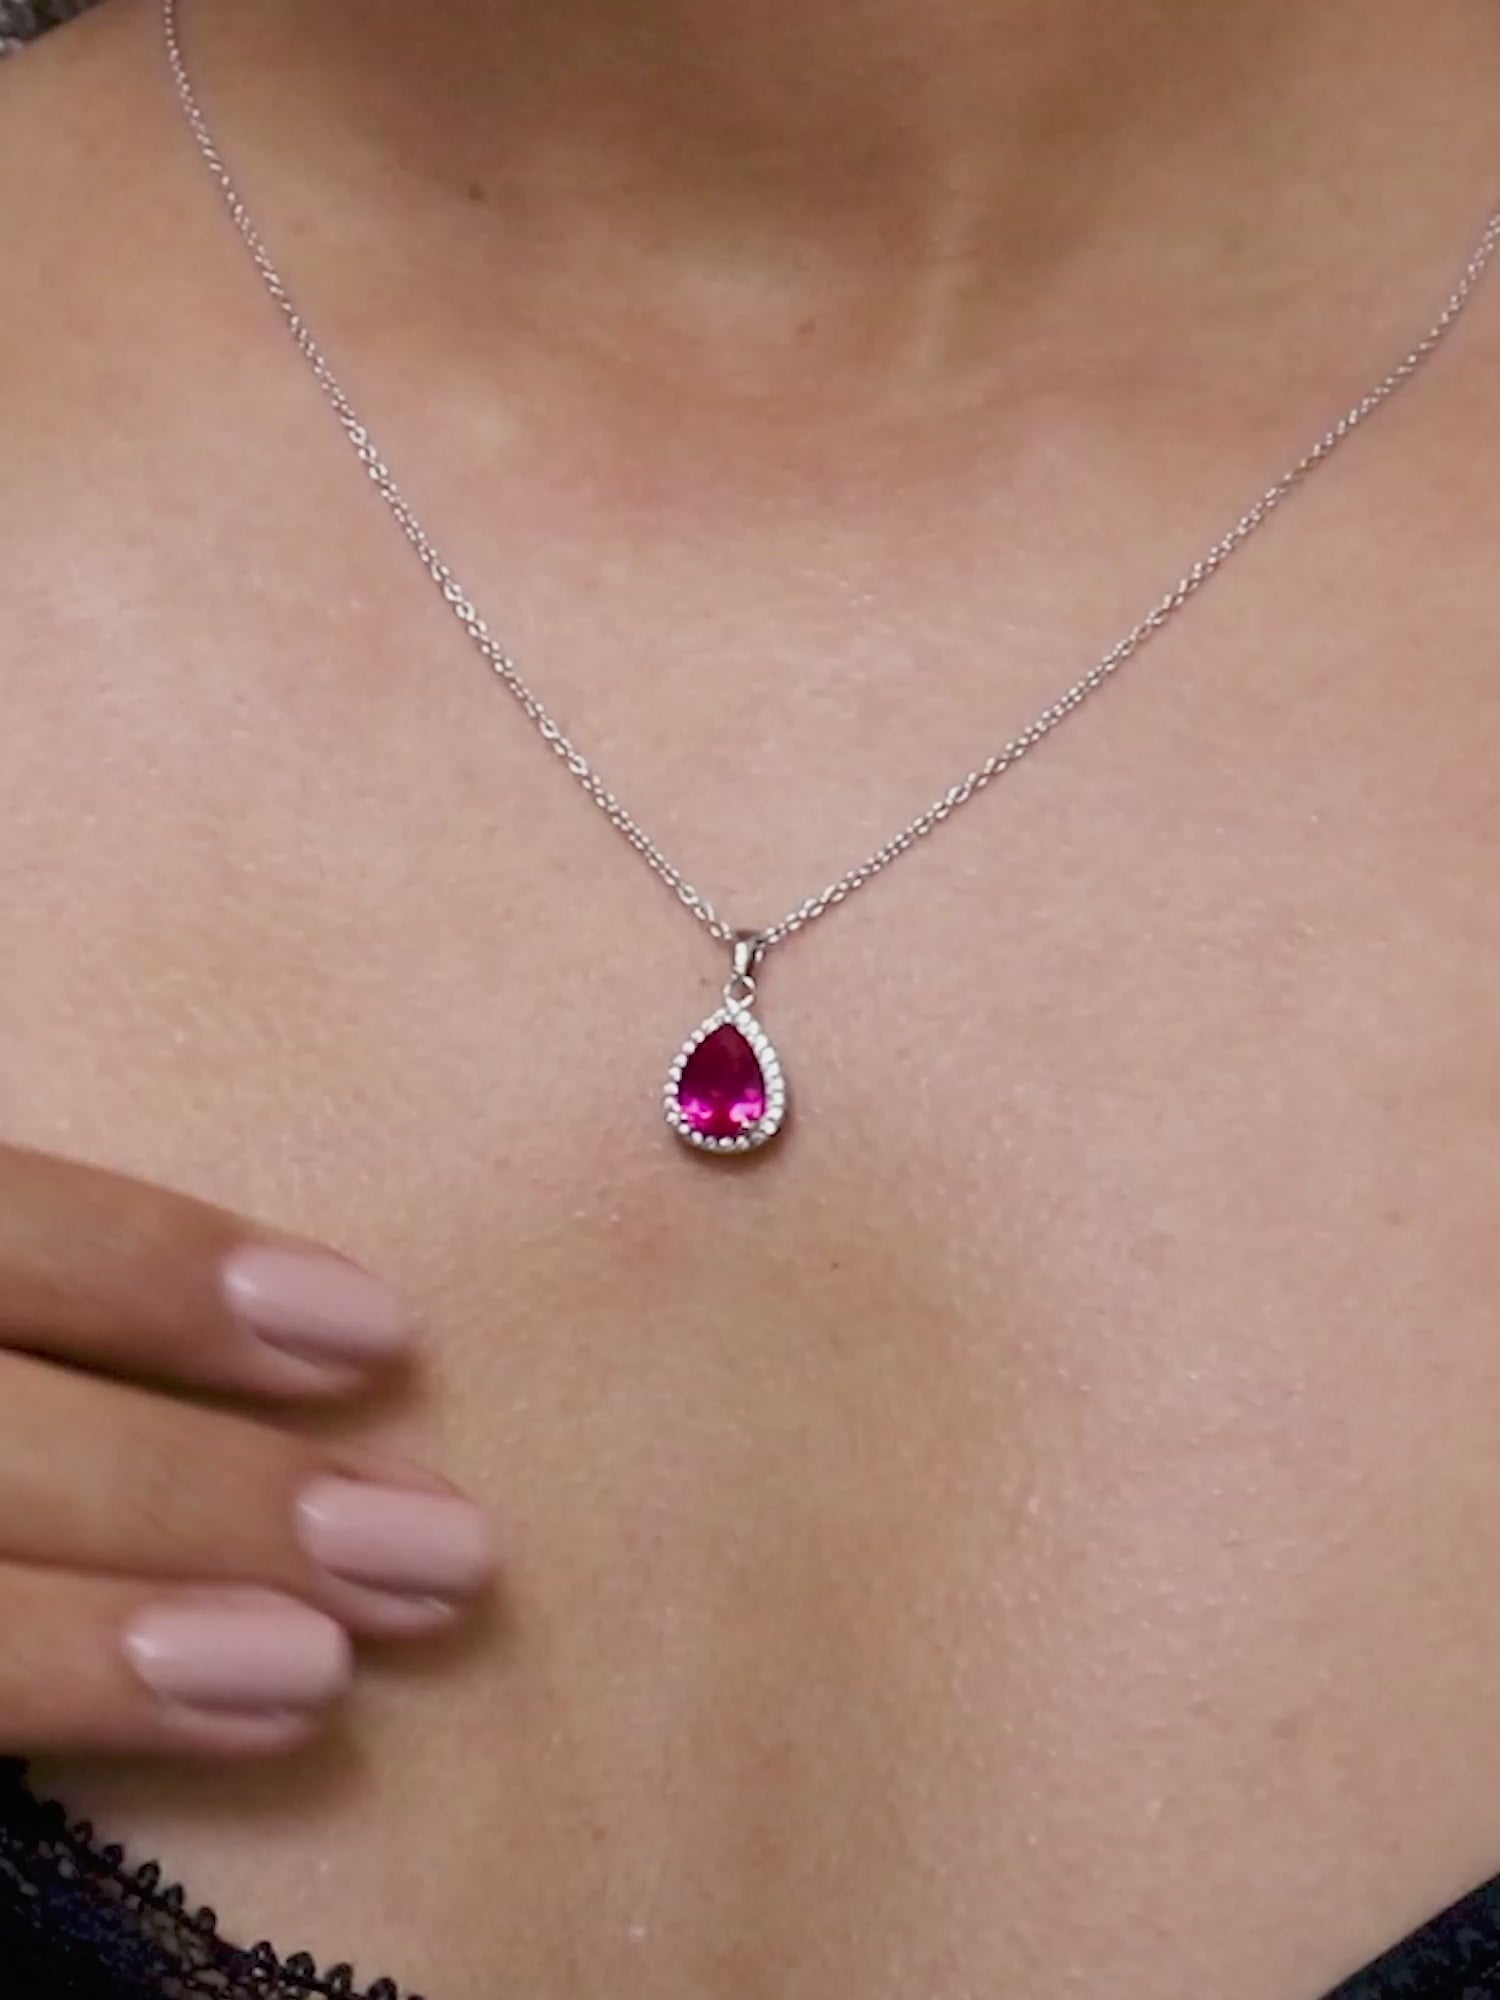 SILVER CREATED RUBY PENDANT AND EARRINGS IN PEAR SHAPE